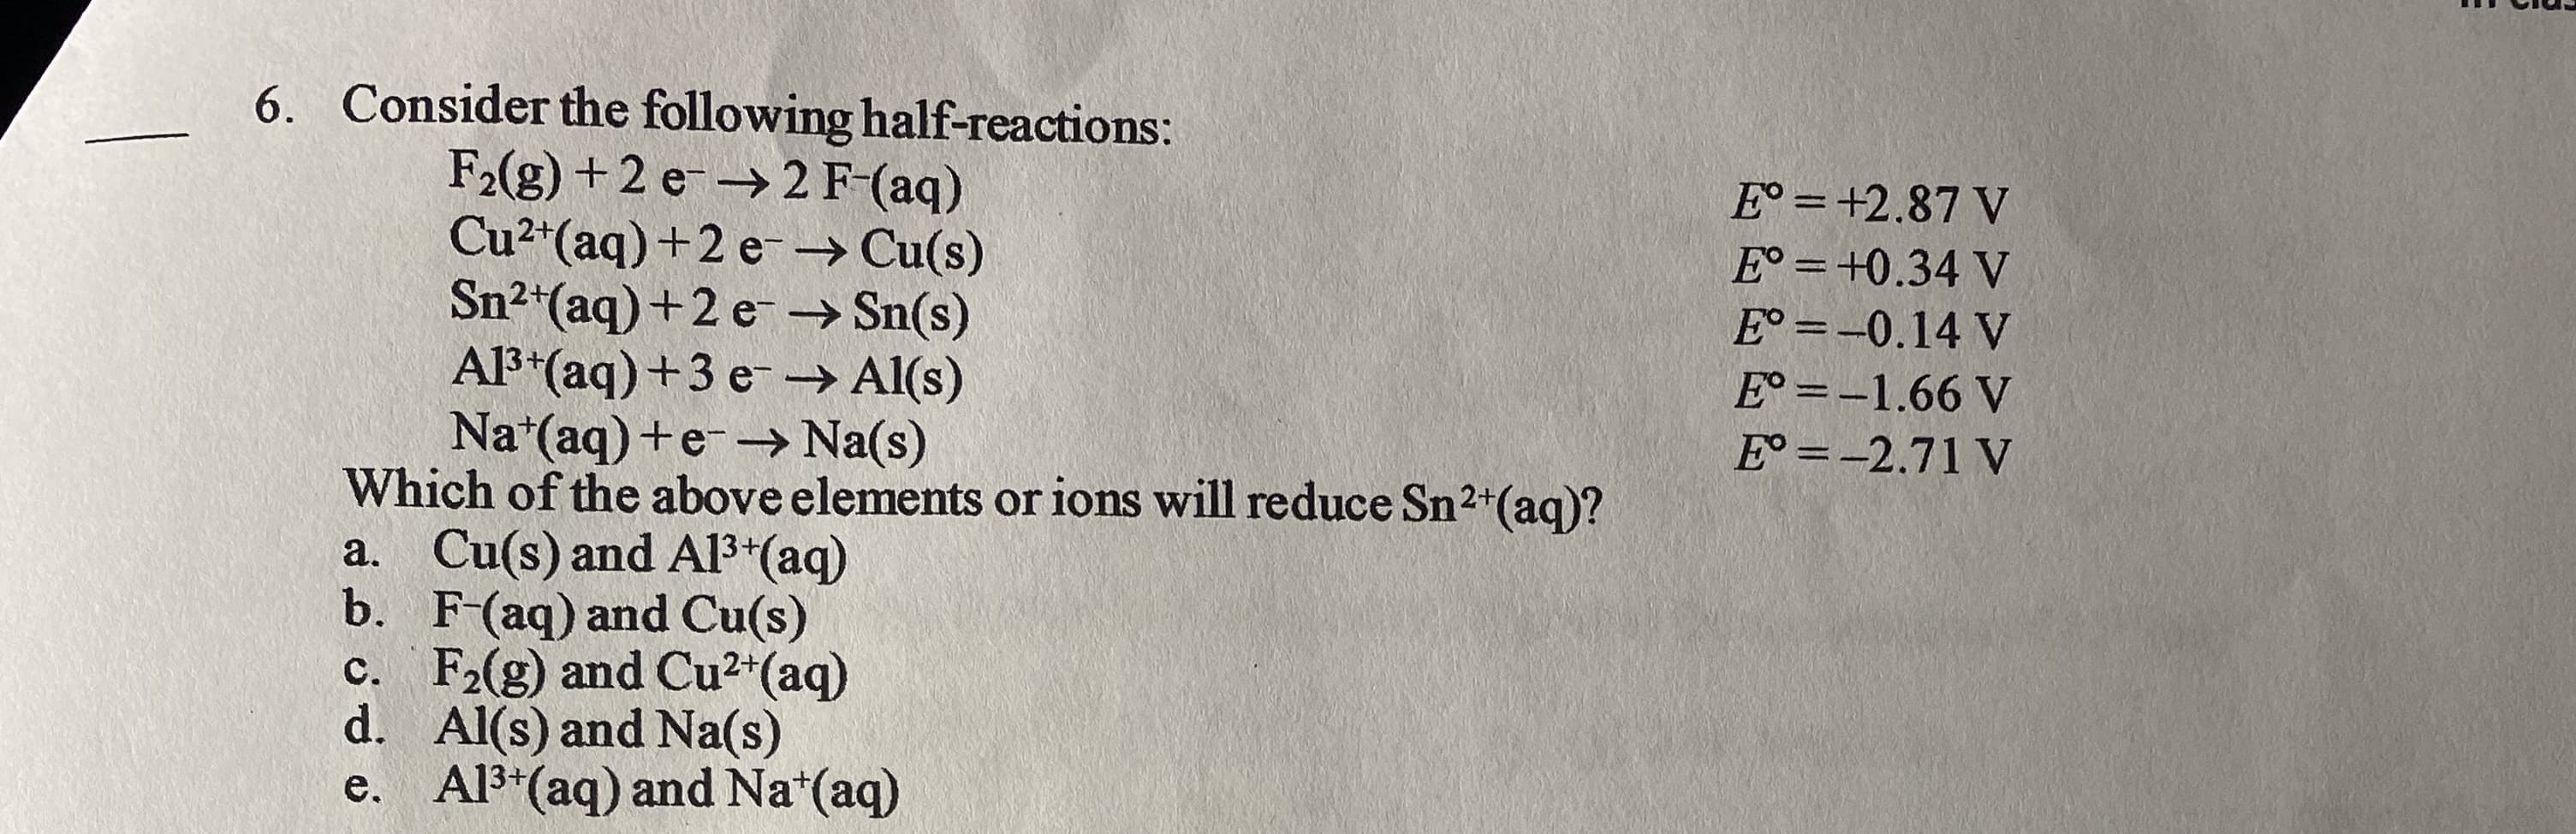 6. Consider the following half-reactions:
F2(g) +2 e-→2 F-(aq)
Cu2*(aq)+2 e-→ Cu(s)
Sn²*(aq)+2 e –→ Sn(s)
Al3*(aq) +3 e -→ Al(s)
Na*(aq) +e-→ Na(s)
Which of the above elements or ions will reduce Sn2+(aq)?
a. Cu(s) and A13*(aq)
b. F-(aq) and Cu(s)
c. F2(g) and Cu2*(aq)
d. Al(s) and Na(s)
e. Al3*(aq) and Na*(aq)
E° = +2.87 V
E° =+0.34 V
E° = -0.14 V
%3D
E° =-1.66 V
E° =-2.71 V
%3D
